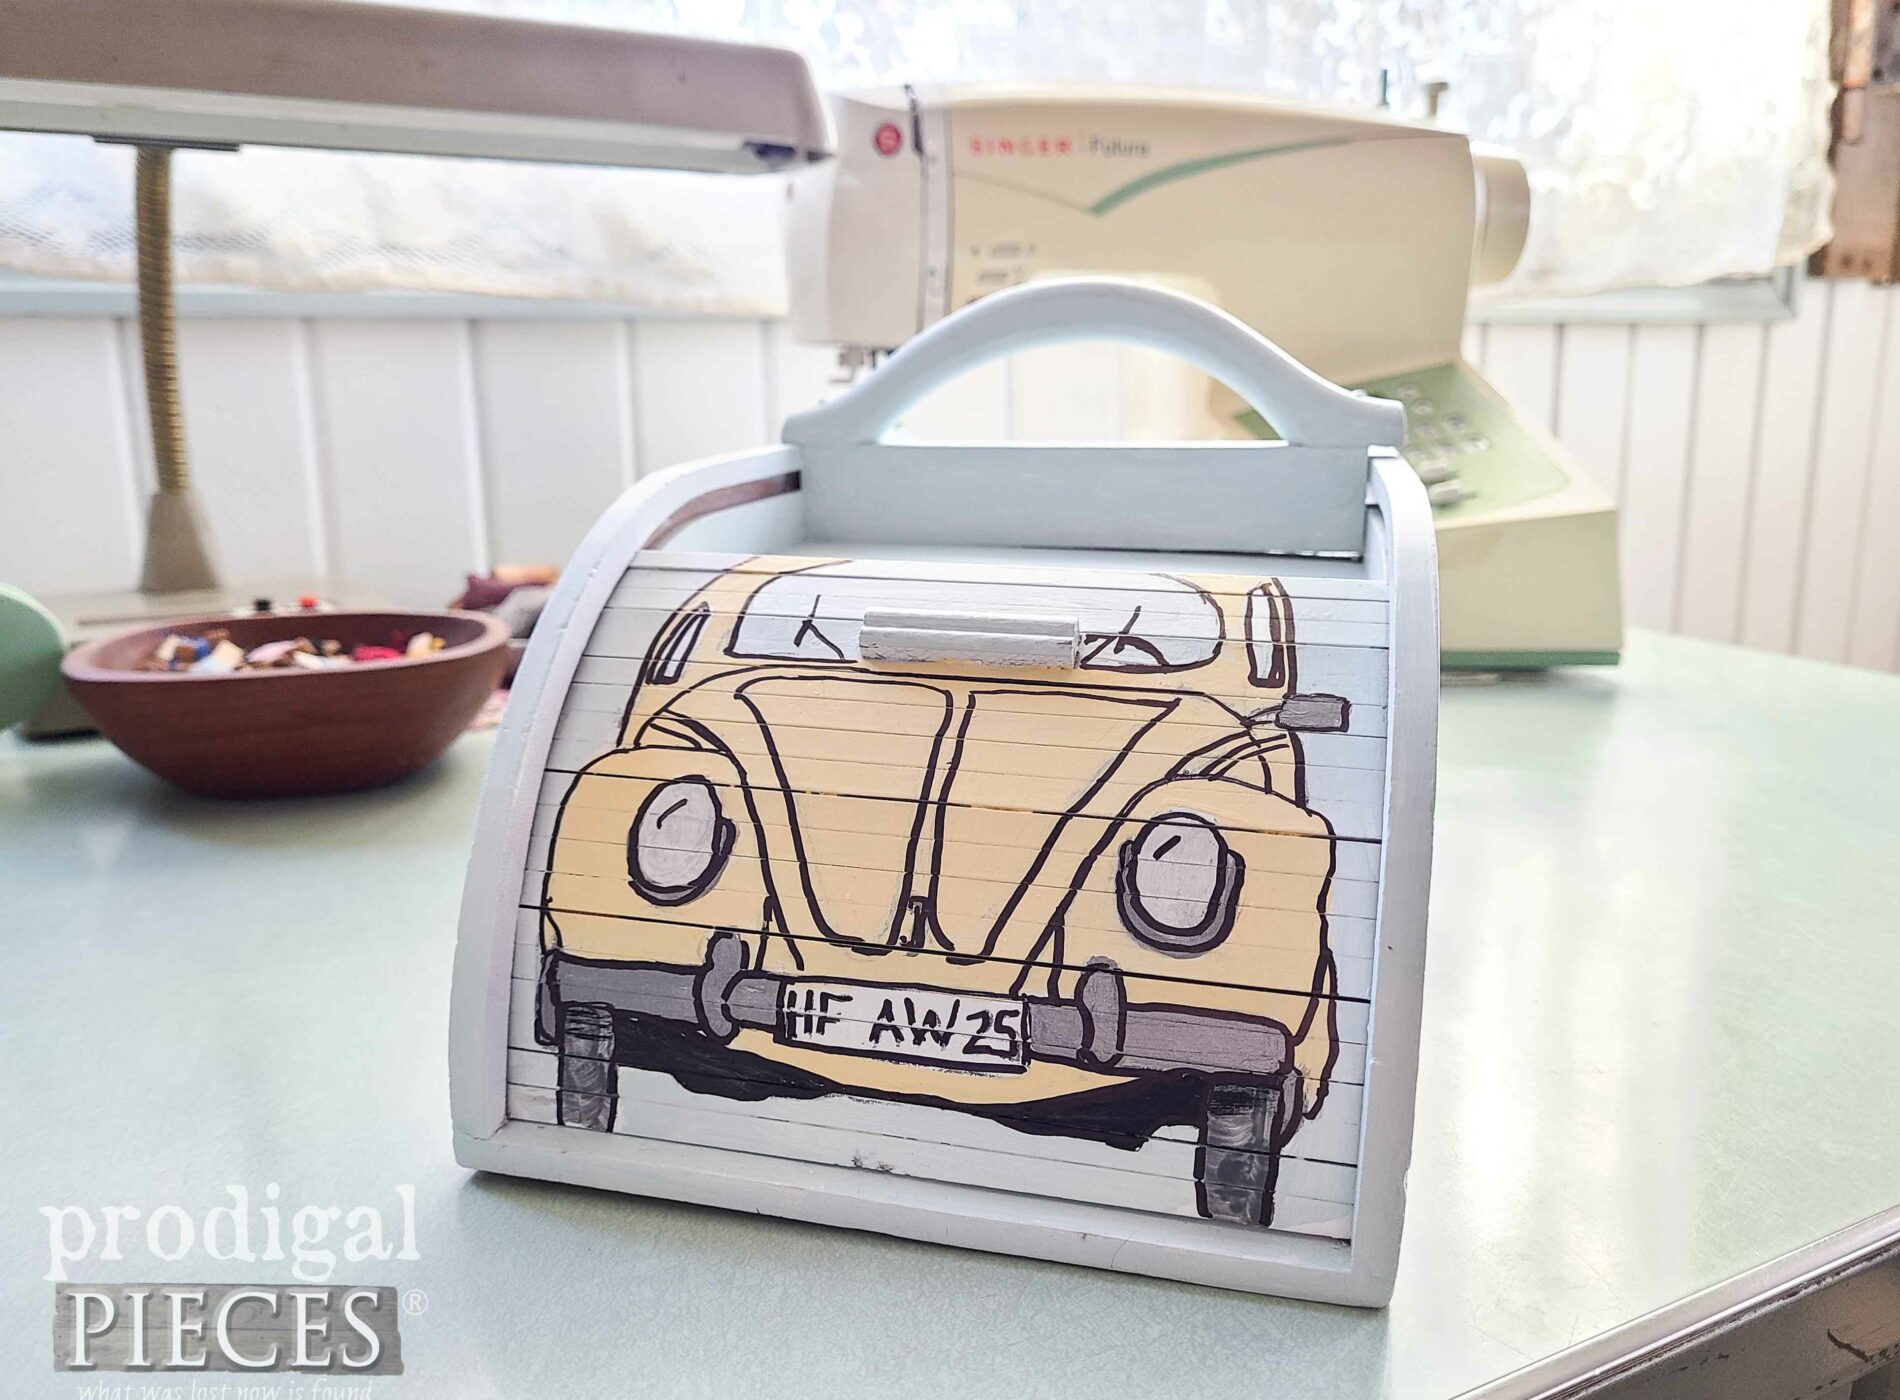 Hand-Painted Volkswagen Vintage Sewing Box available at Prodigal Pieces | shop.prodigalpieces.com #prodigalpieces